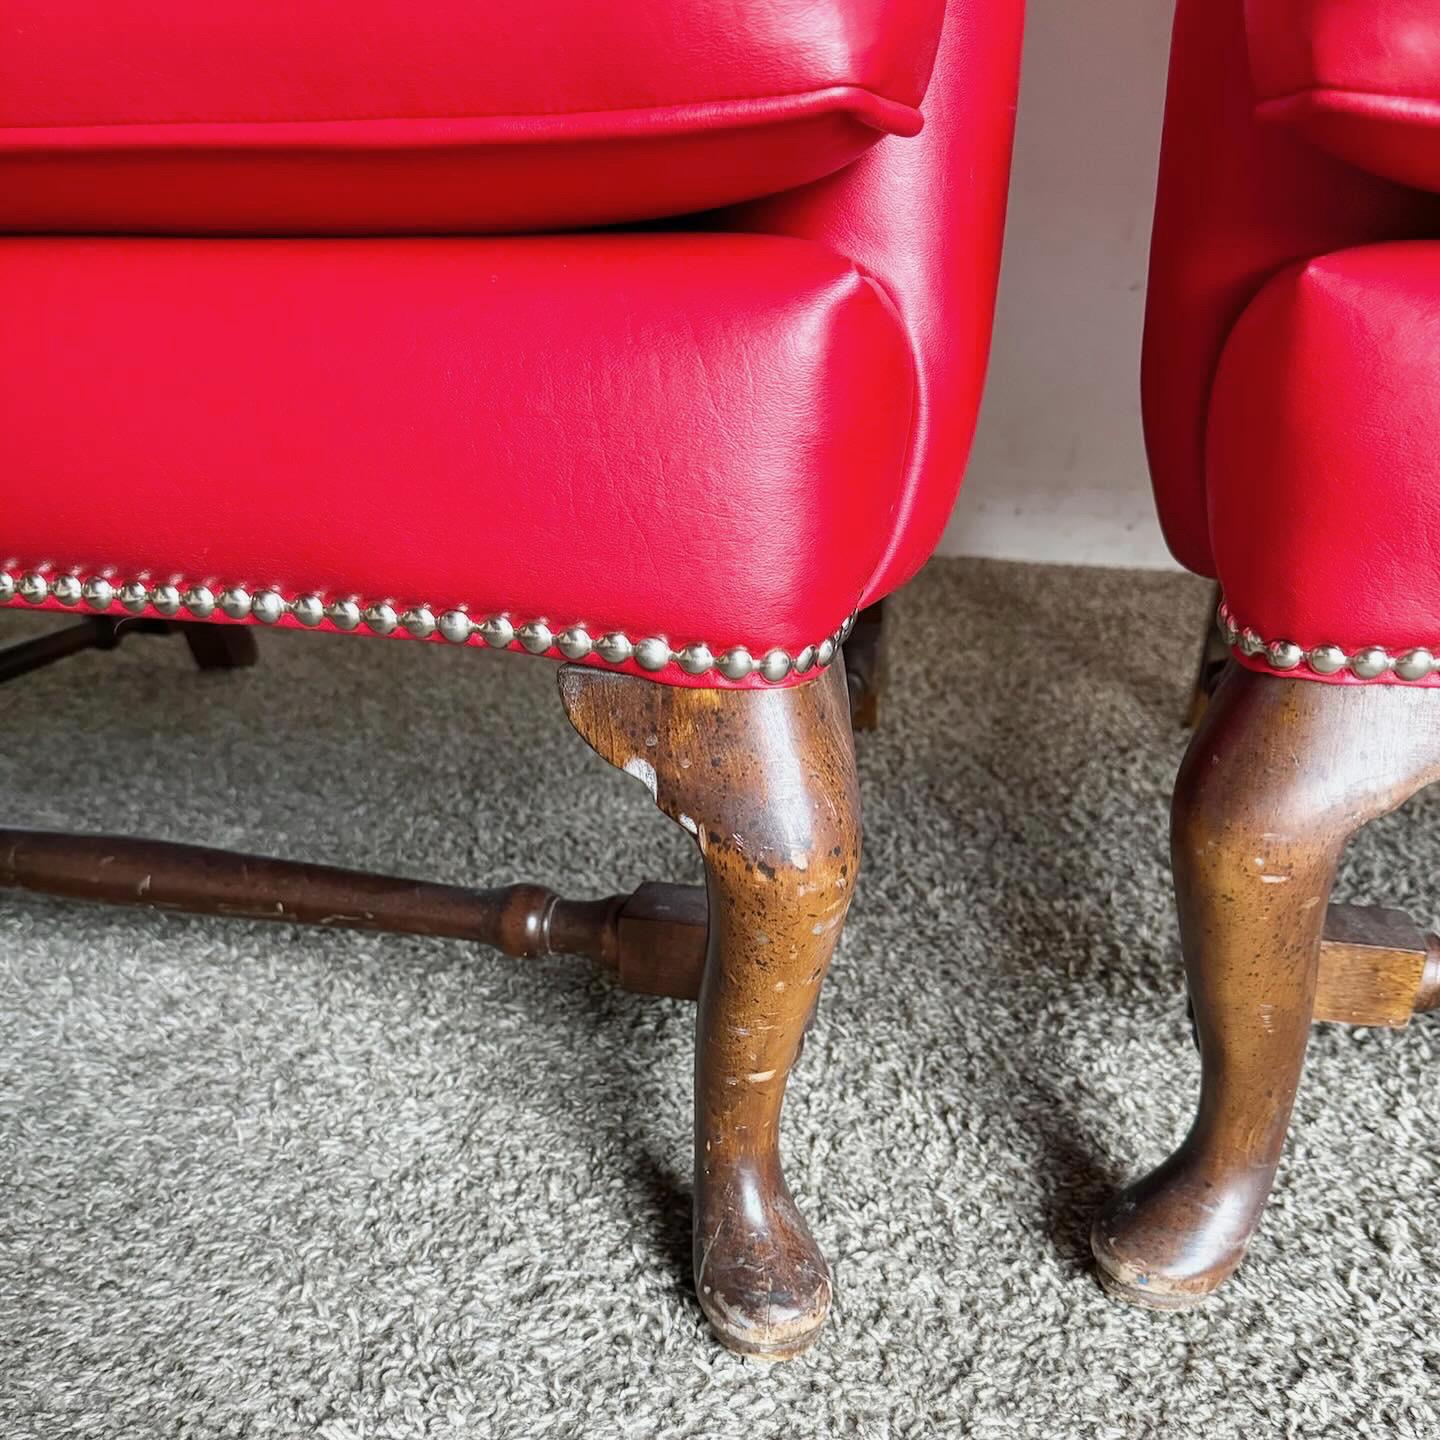 20th Century Traditional Red Faux Leather Wingback Chairs - a Pair For Sale